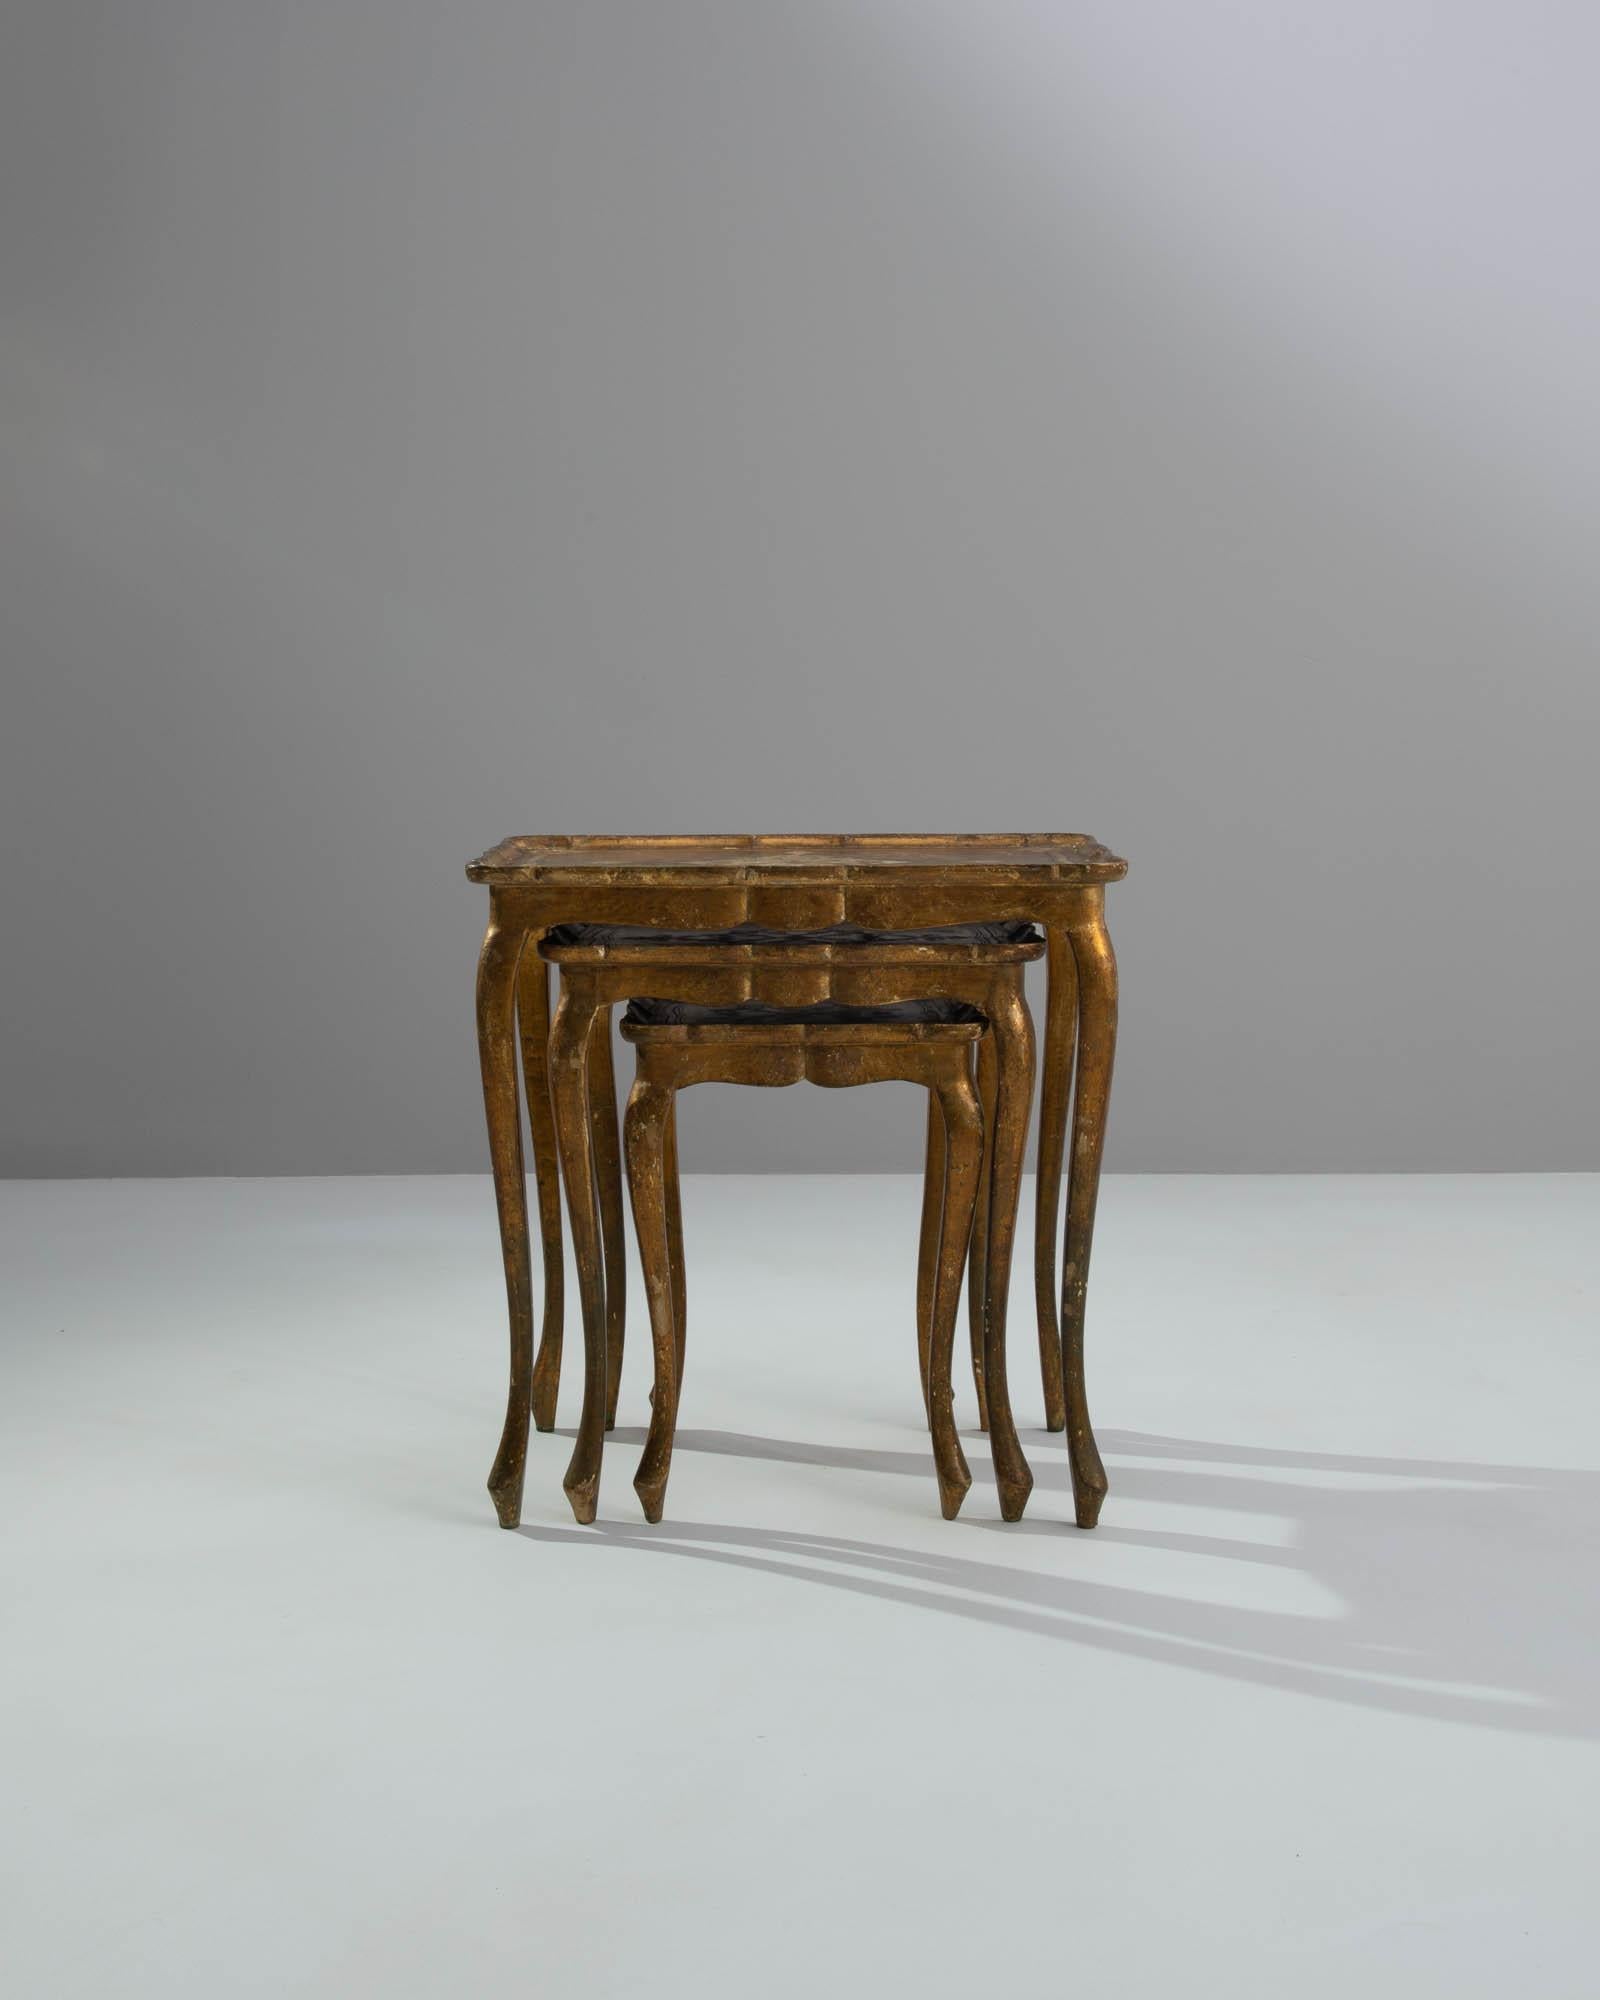 This trio of nesting tables evokes a bygone era of extravagance. Made in Italy in the 20th century, the design takes inspiration from the lavish furniture of Baroque palaces and stately villas. In particular, the embossed motif at center of the